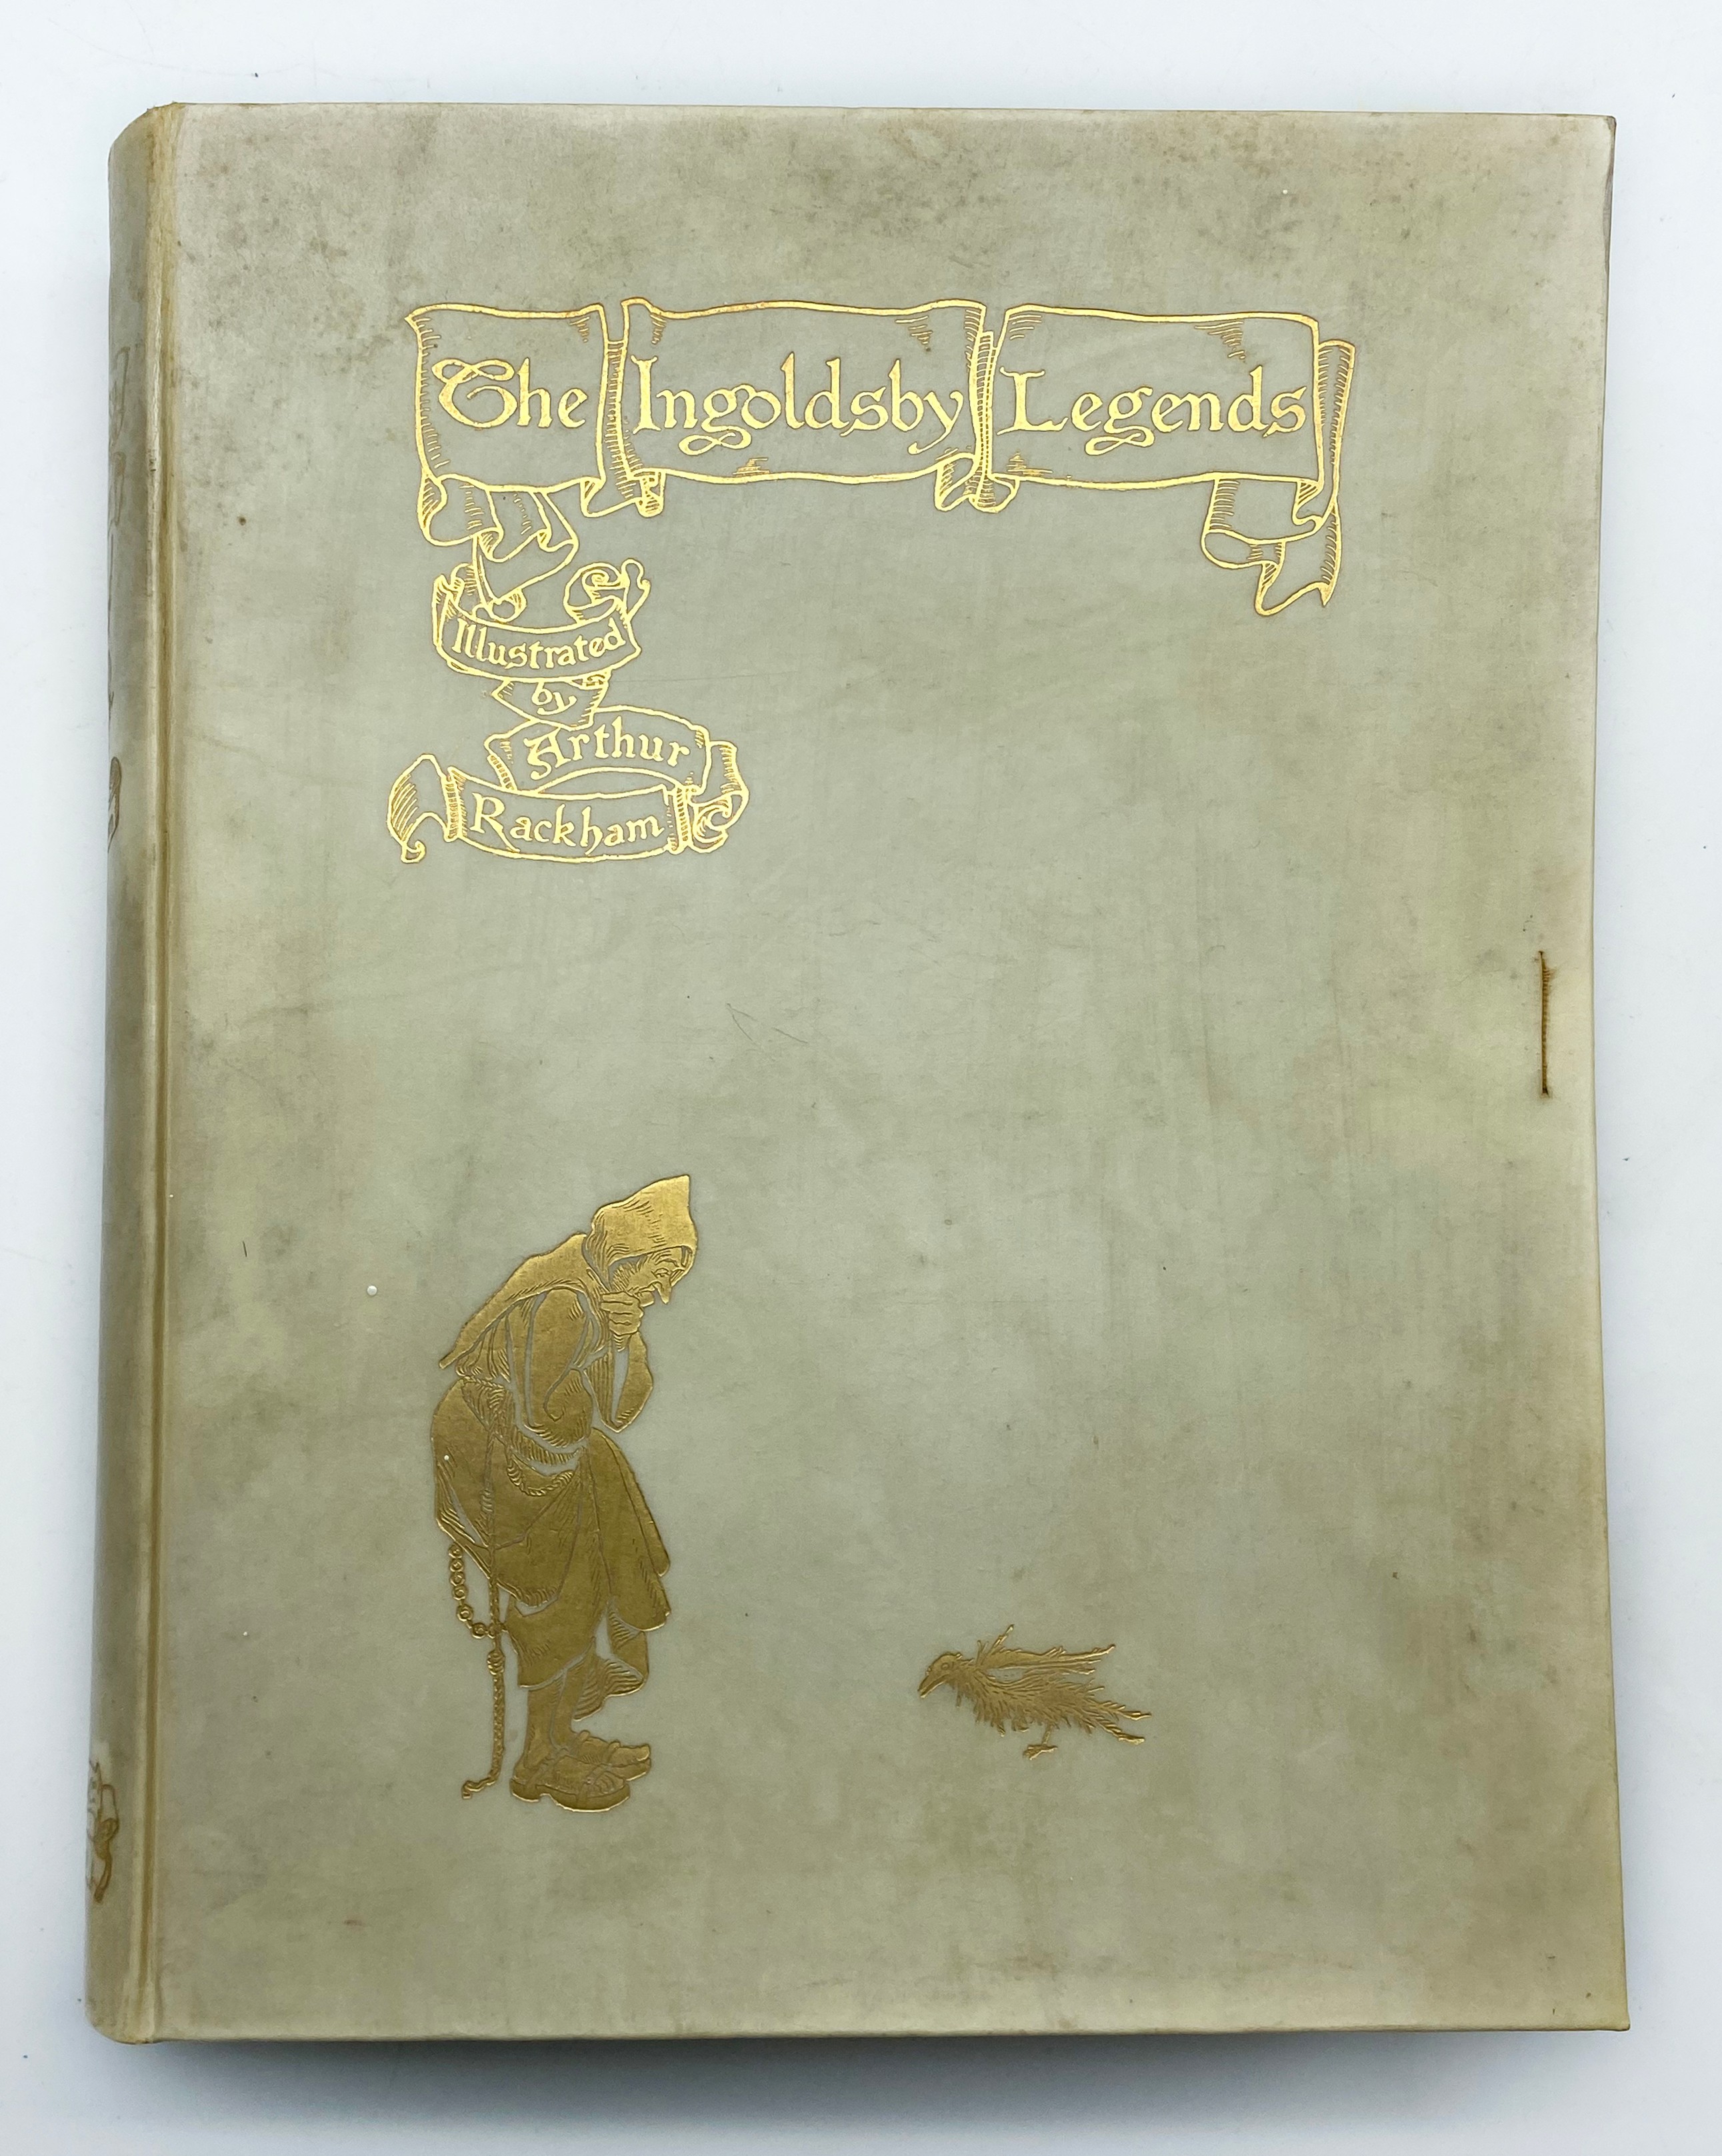 THE INGOLDSBY LEGENDS ILLUSTRATED BY ARTHUR RACKHAM LIMITED EDITION 1907